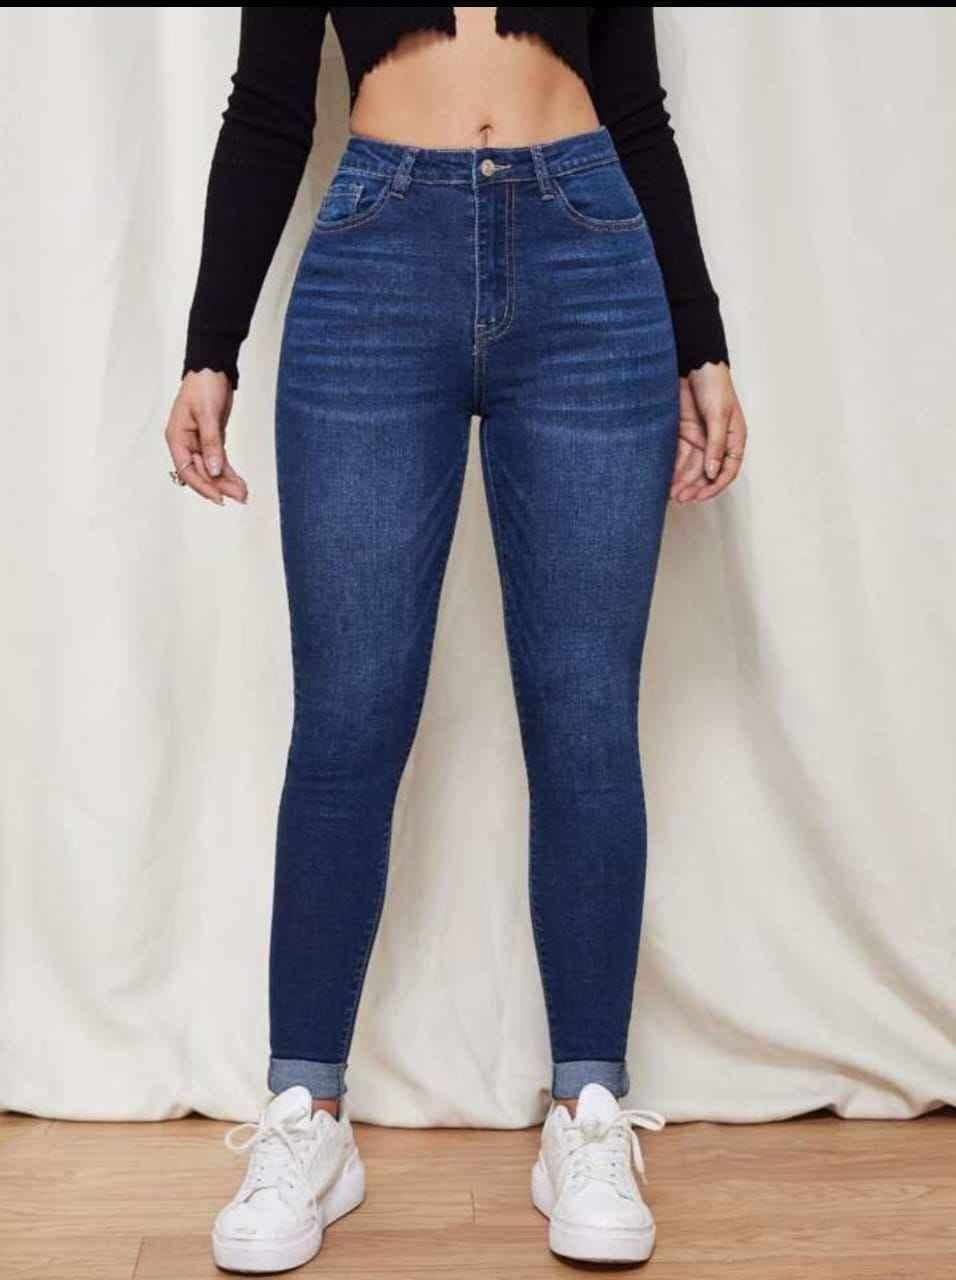 Basic Sensational High Rise Stretchable Causal Jeans For Women's